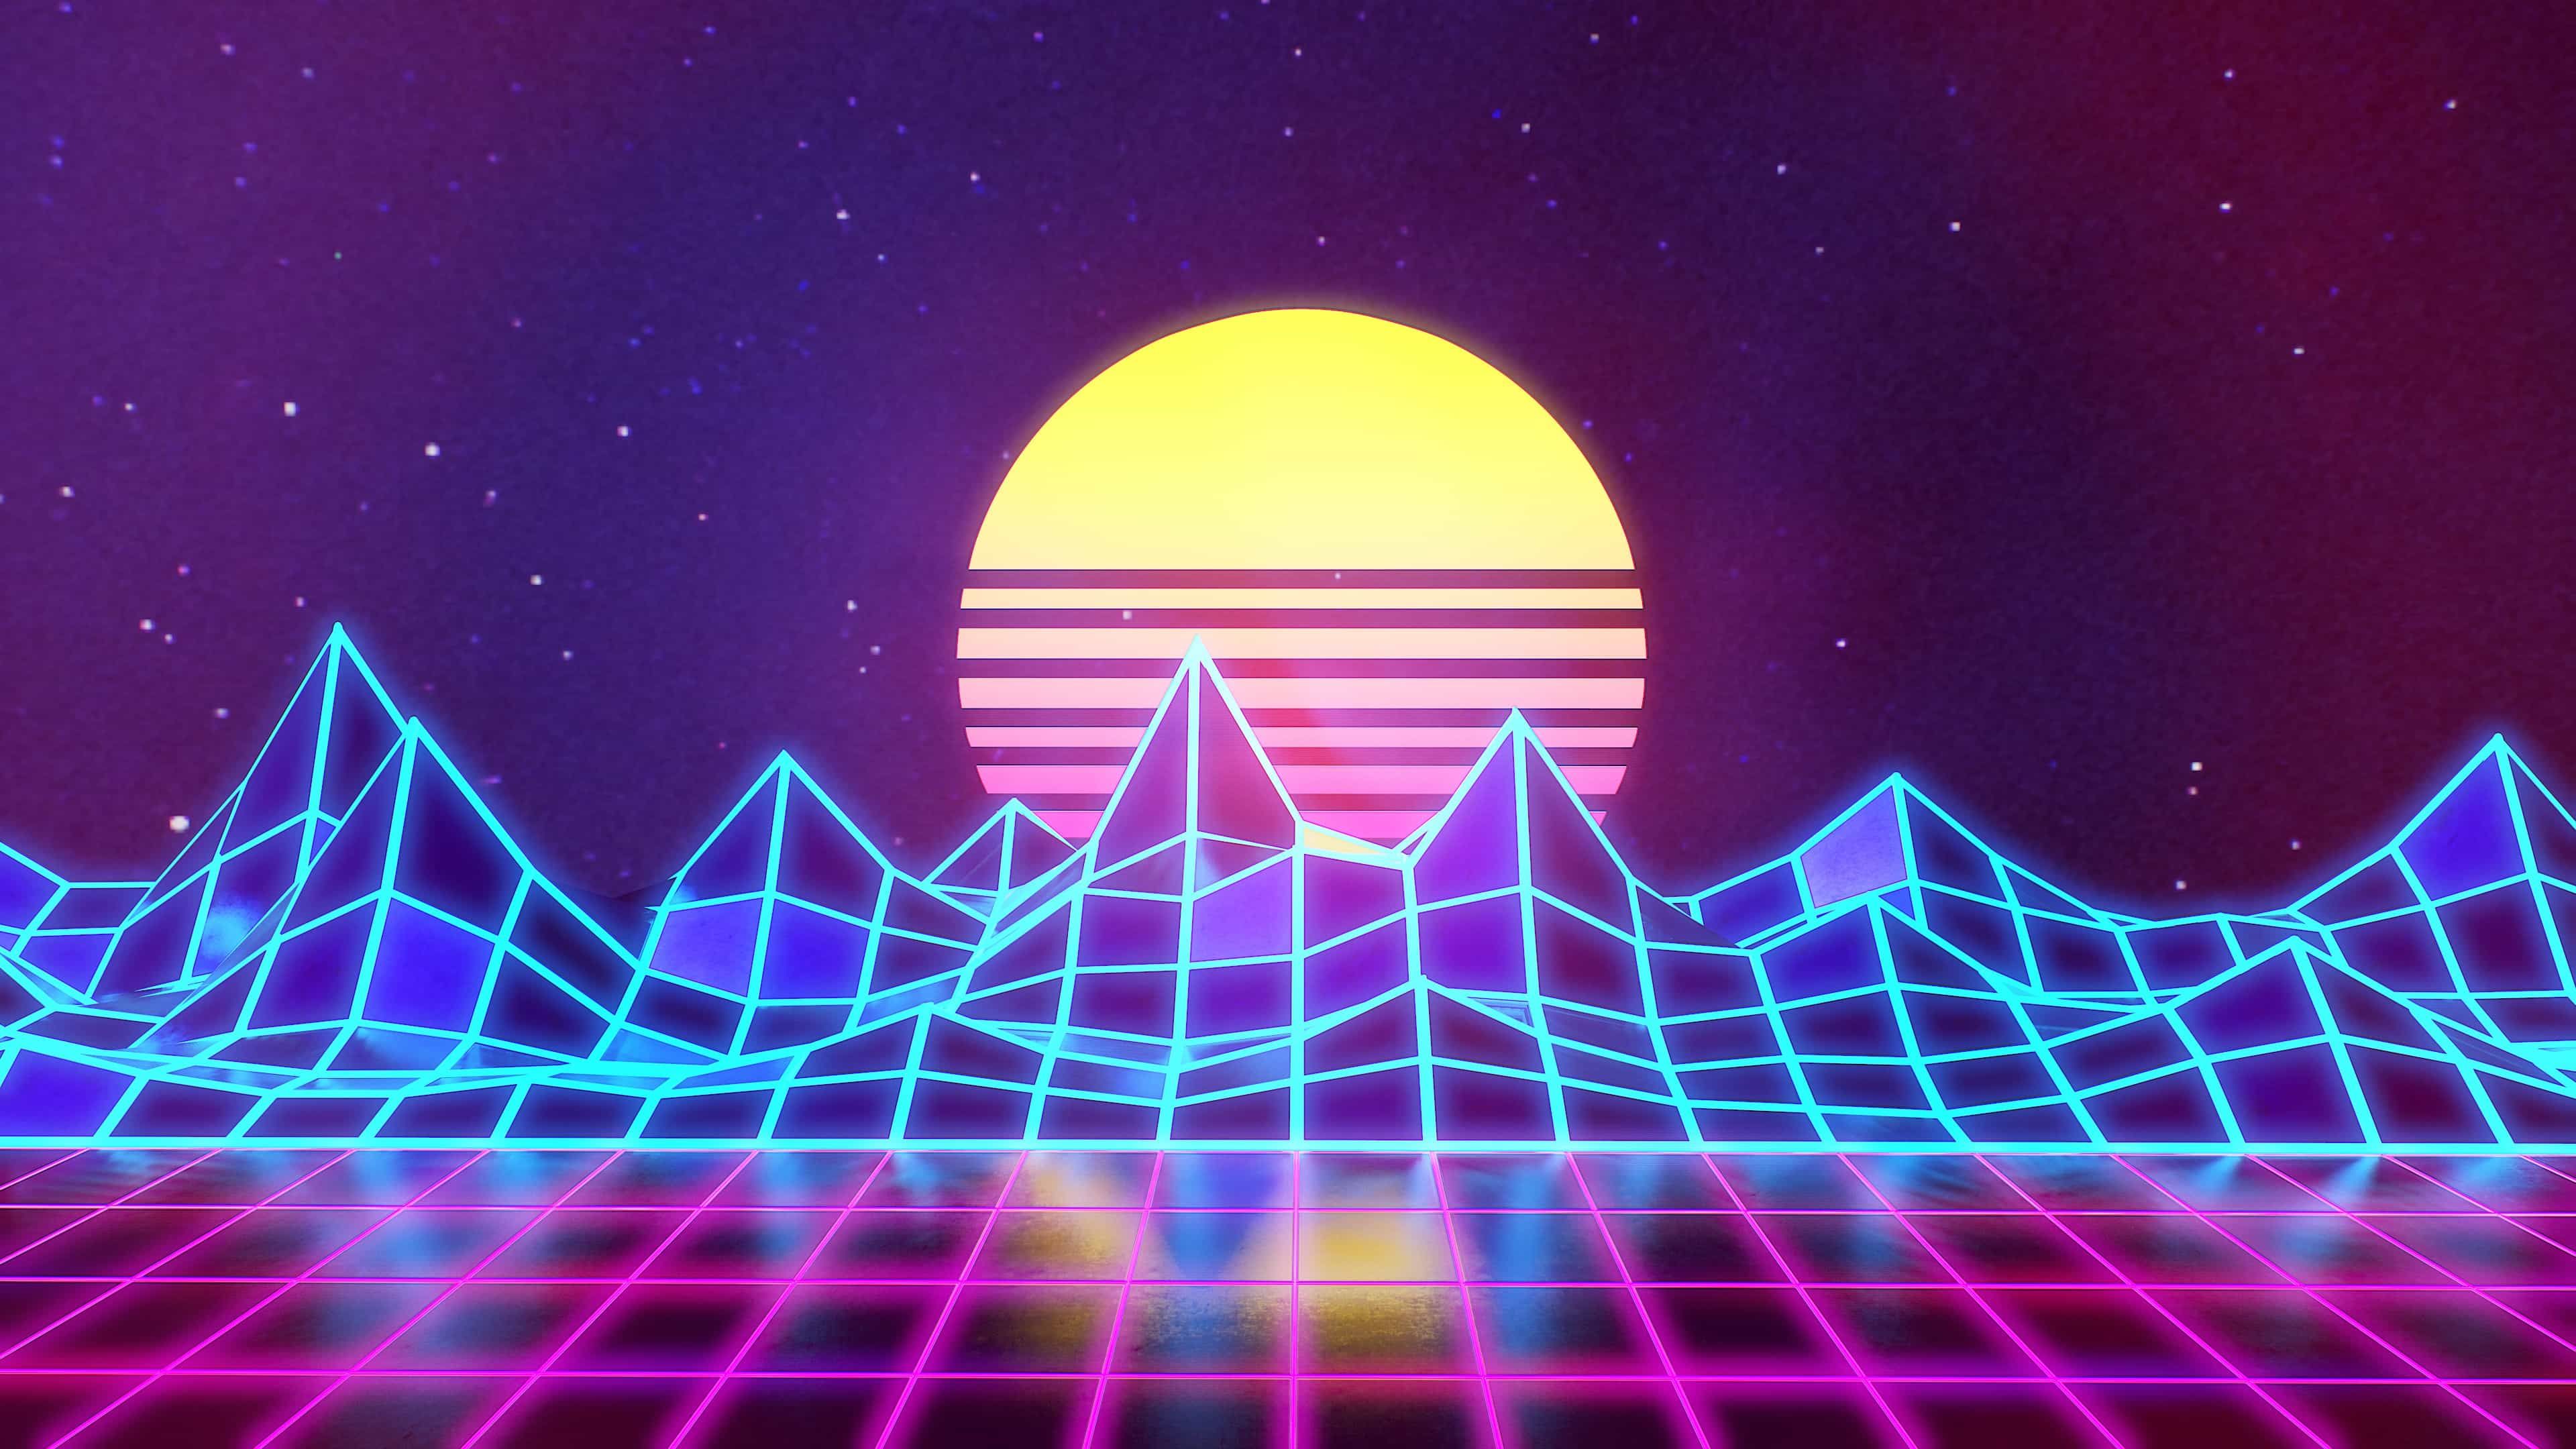 Pin by Username 14 on Synthwave Game Neon 80s background 80s neon